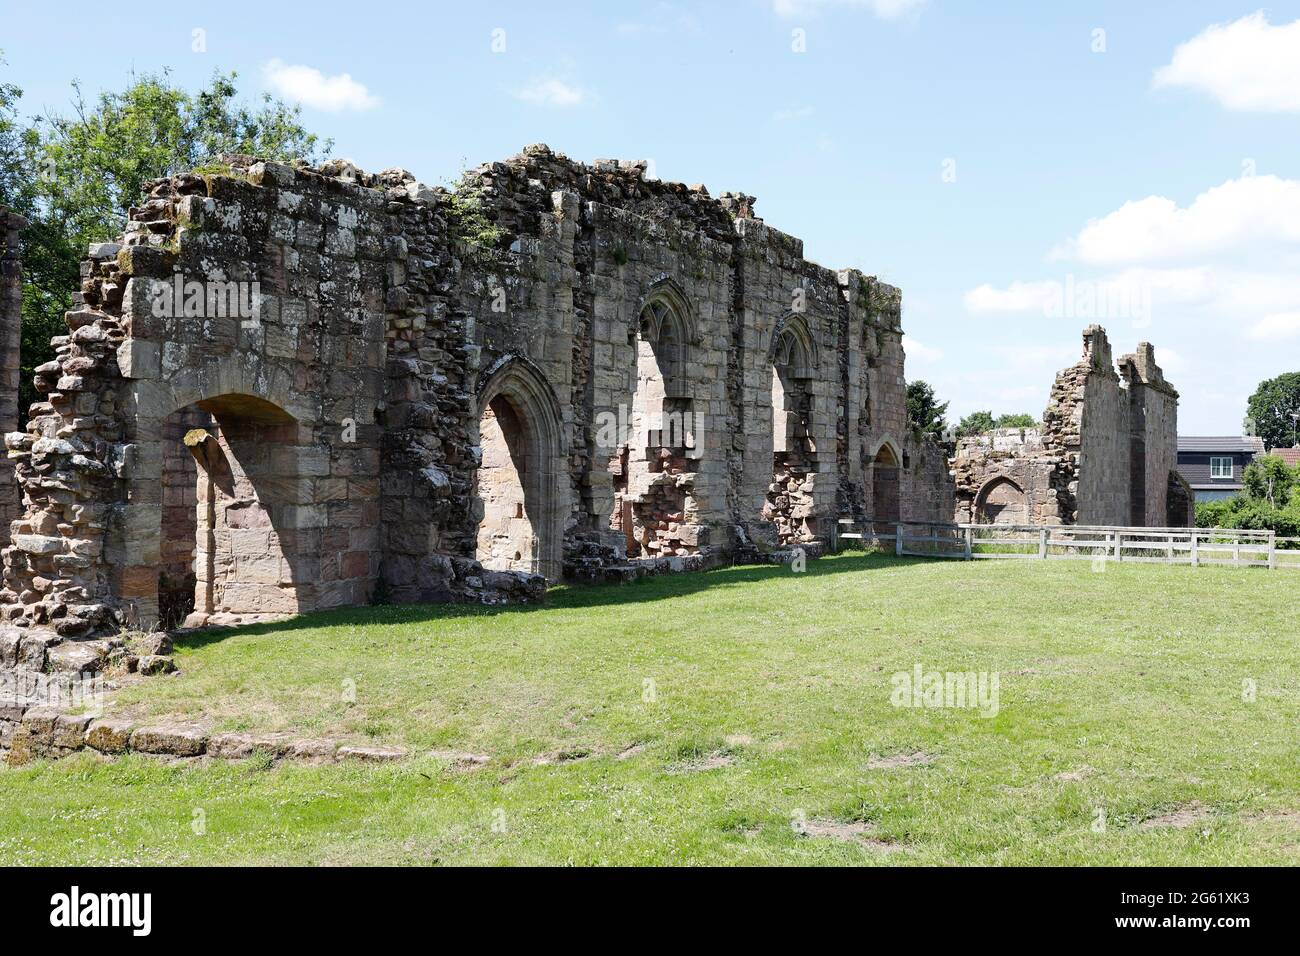 Spofforth Castle, Near harrogate. North Yorkshire, UK  A manor house built around 1224. The Magna Carter was reputed to be drawn up in Spofforth 1215 Stock Photo